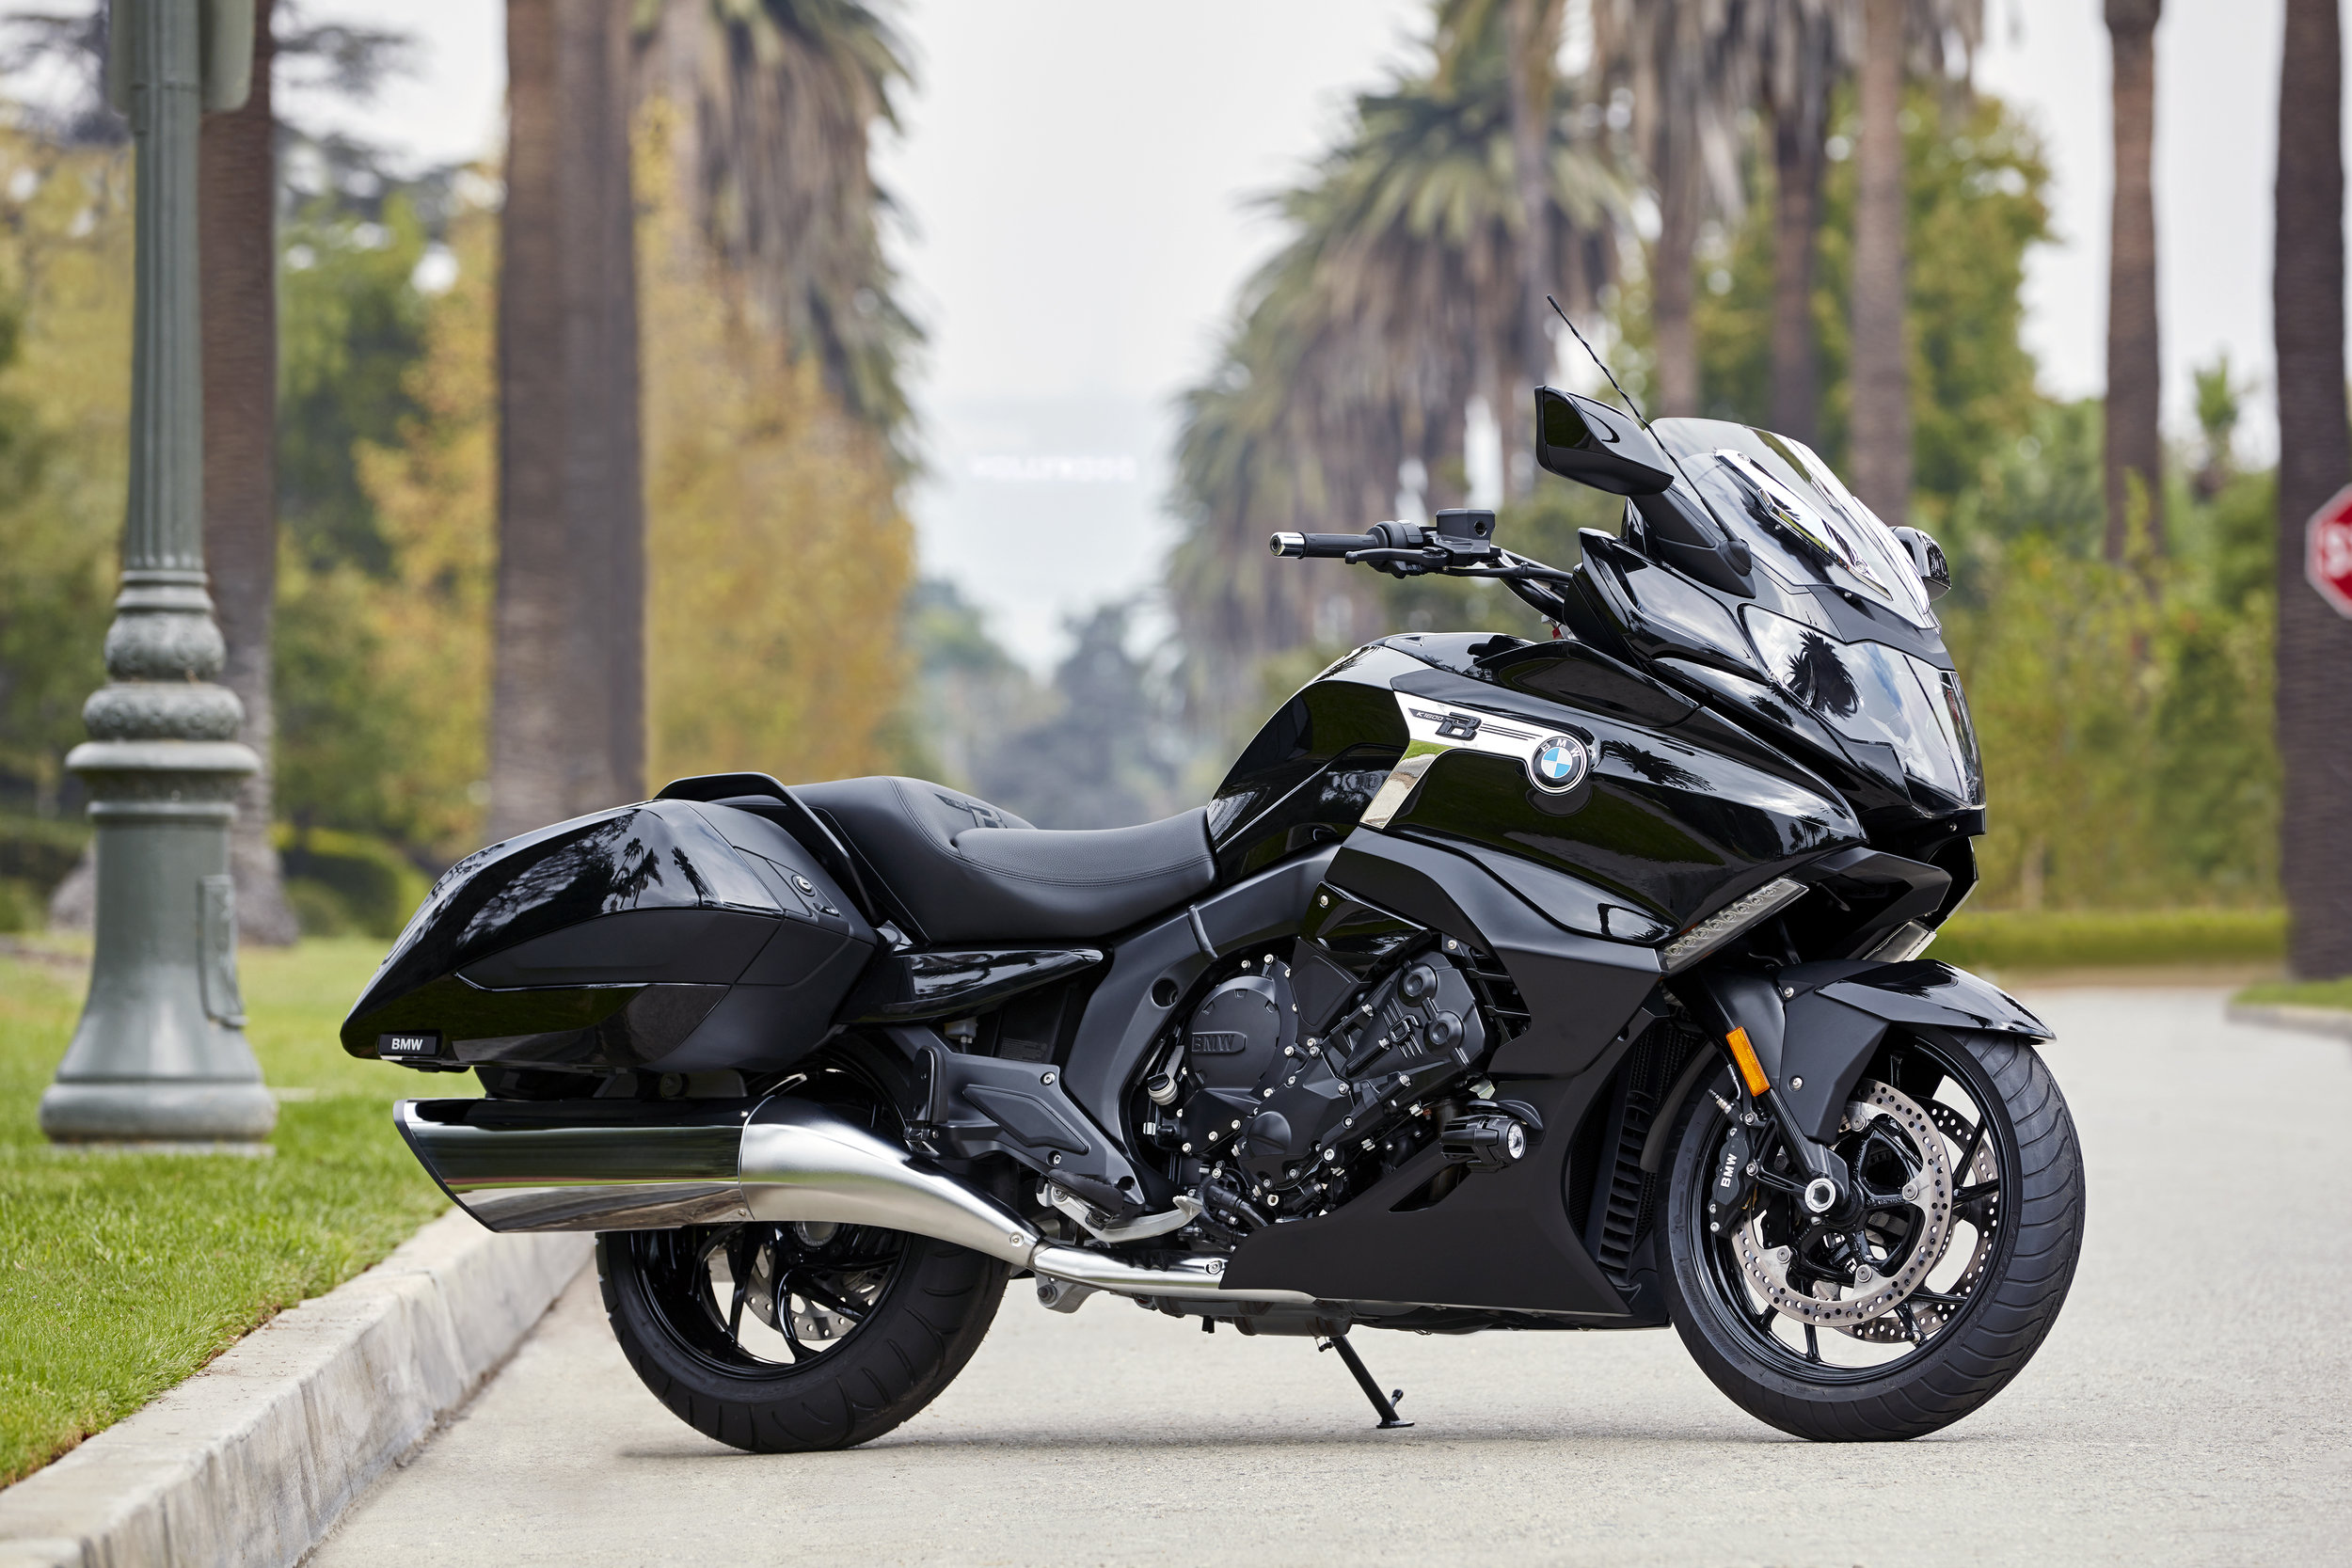 BMW K 1600 B Unveiled To U.S. Riders At Progressive International  Motorcycle Show In Cleveland — Sierra BMW Motorcycle